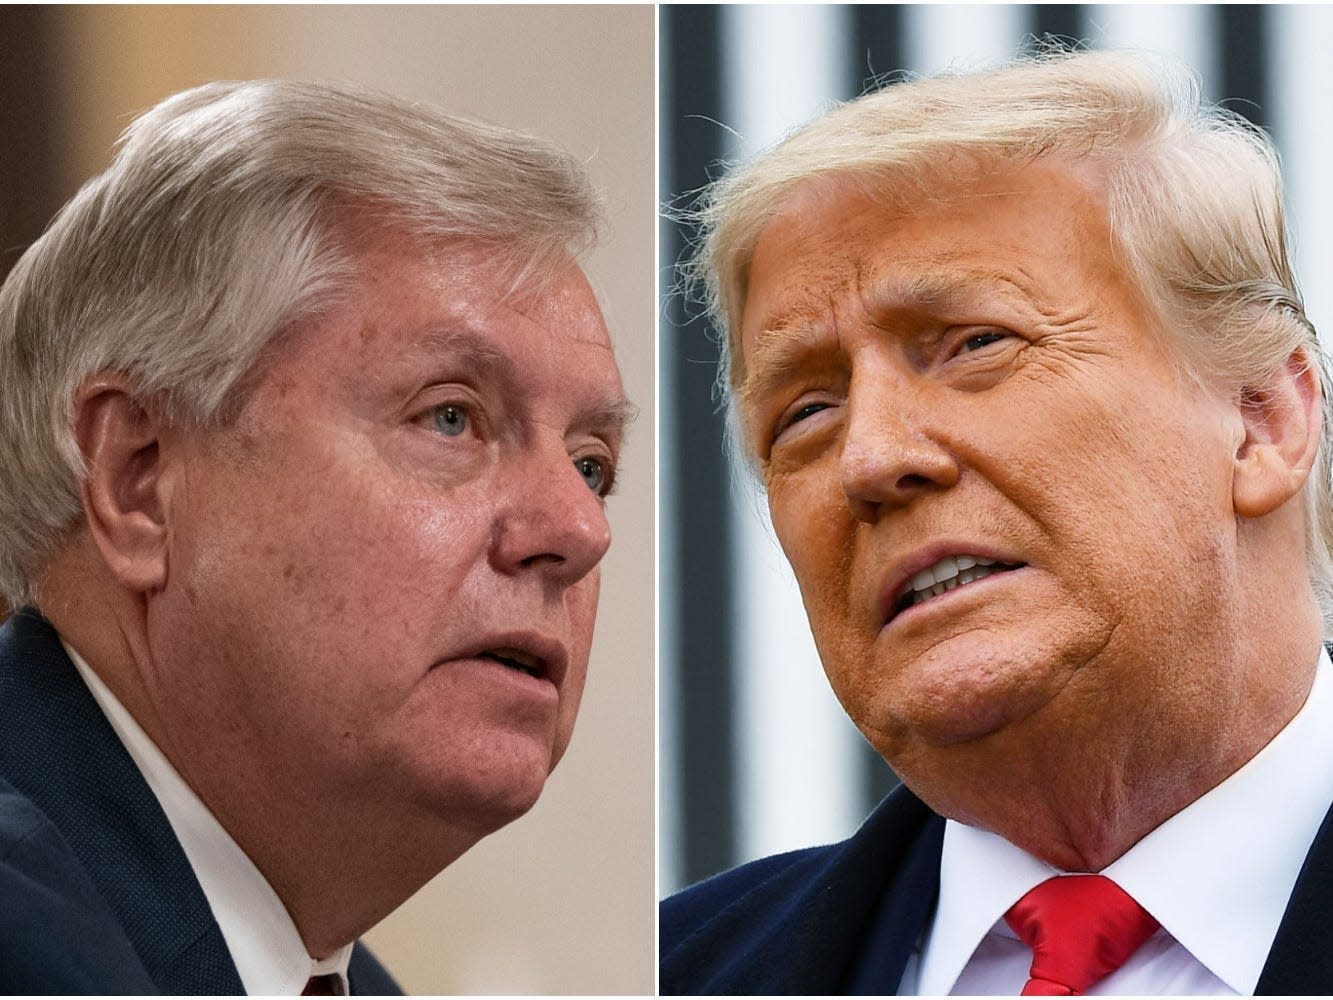 Lindsey Graham has warned Trump that January 6 will be his 'political obituary' if he doesn't get over the 2020 election